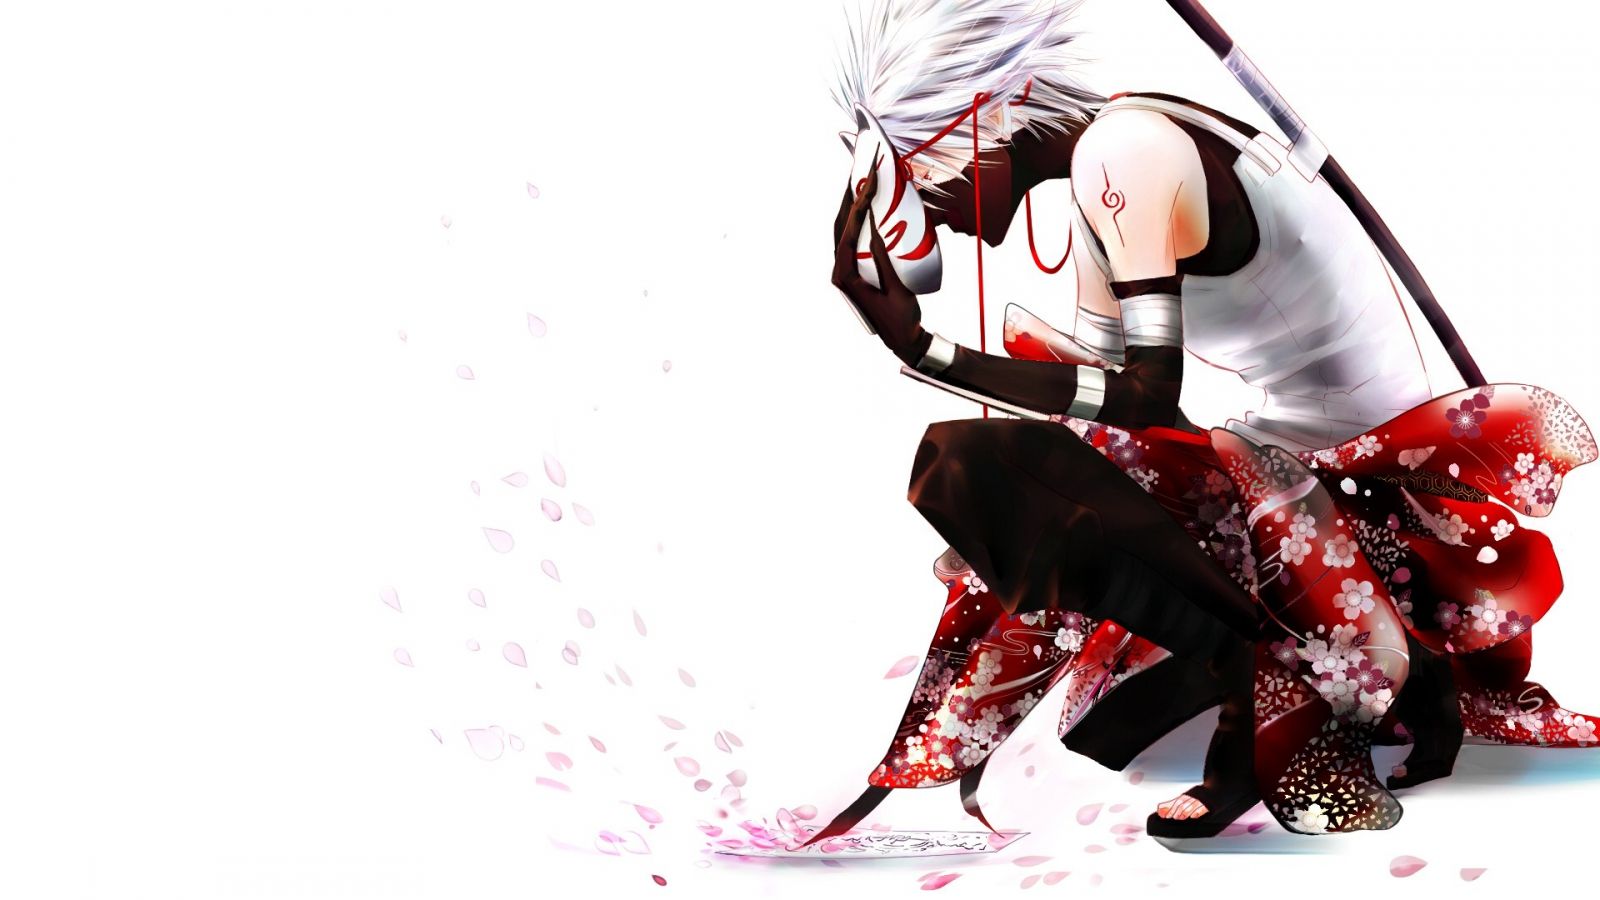 Free download download image Anbu Kakashi Wallpaper PC Android iPhone and [1600x900] for your Desktop, Mobile & Tablet. Explore Anbu Aesthetic Wallpaper. Anbu Aesthetic Wallpaper, Anbu Wallpaper, Anbu Kakashi Wallpaper